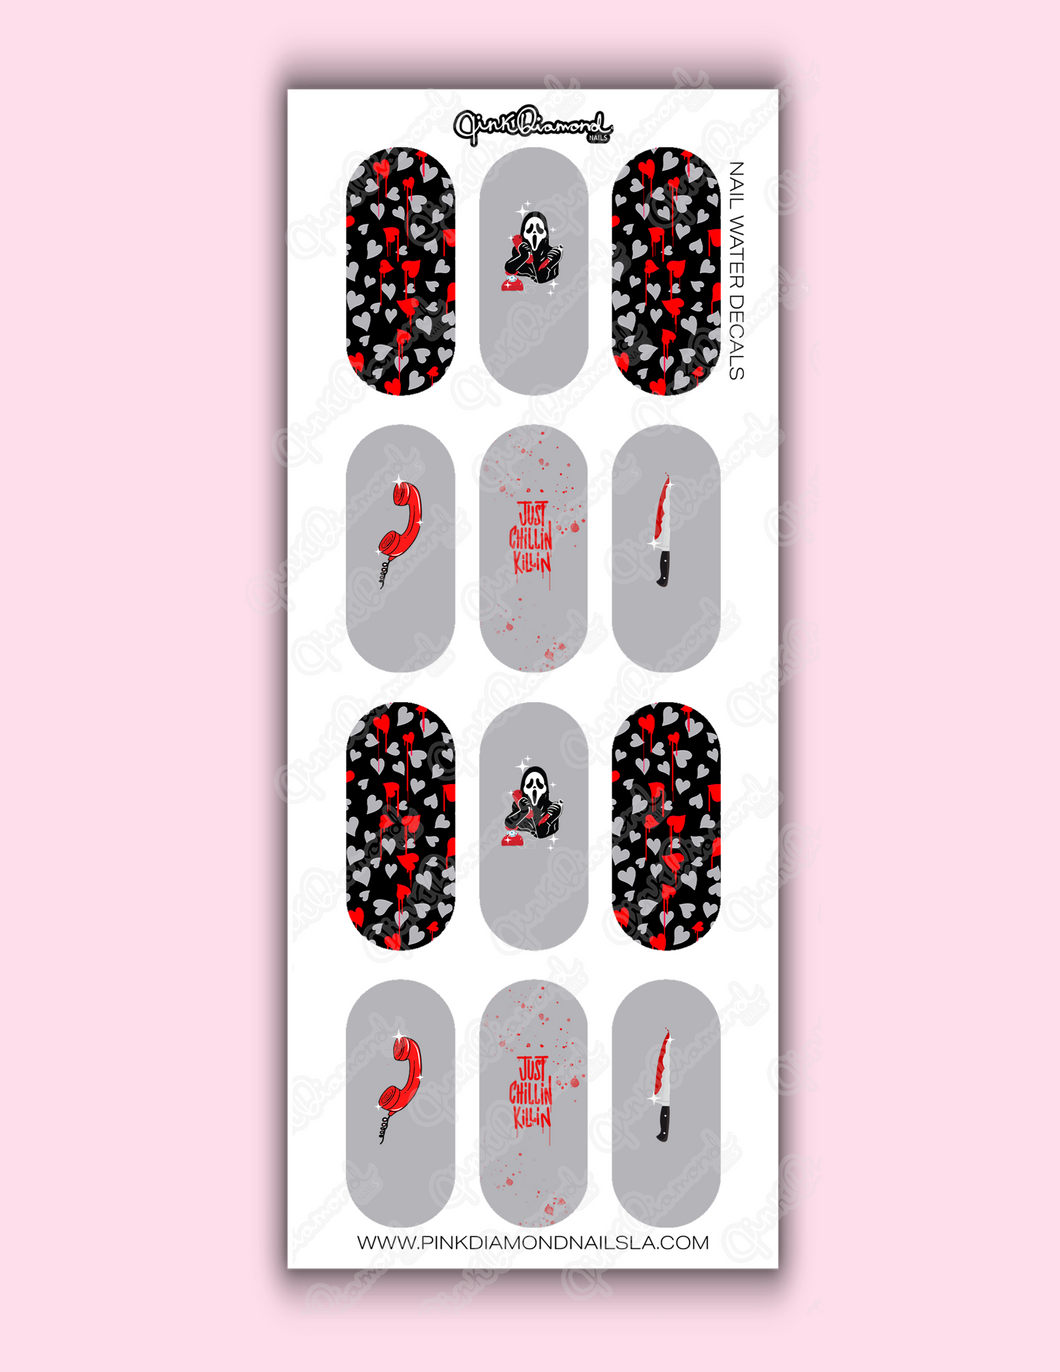 Nail water decals - Screams (Ghost face) Just chillin - Grey / Red